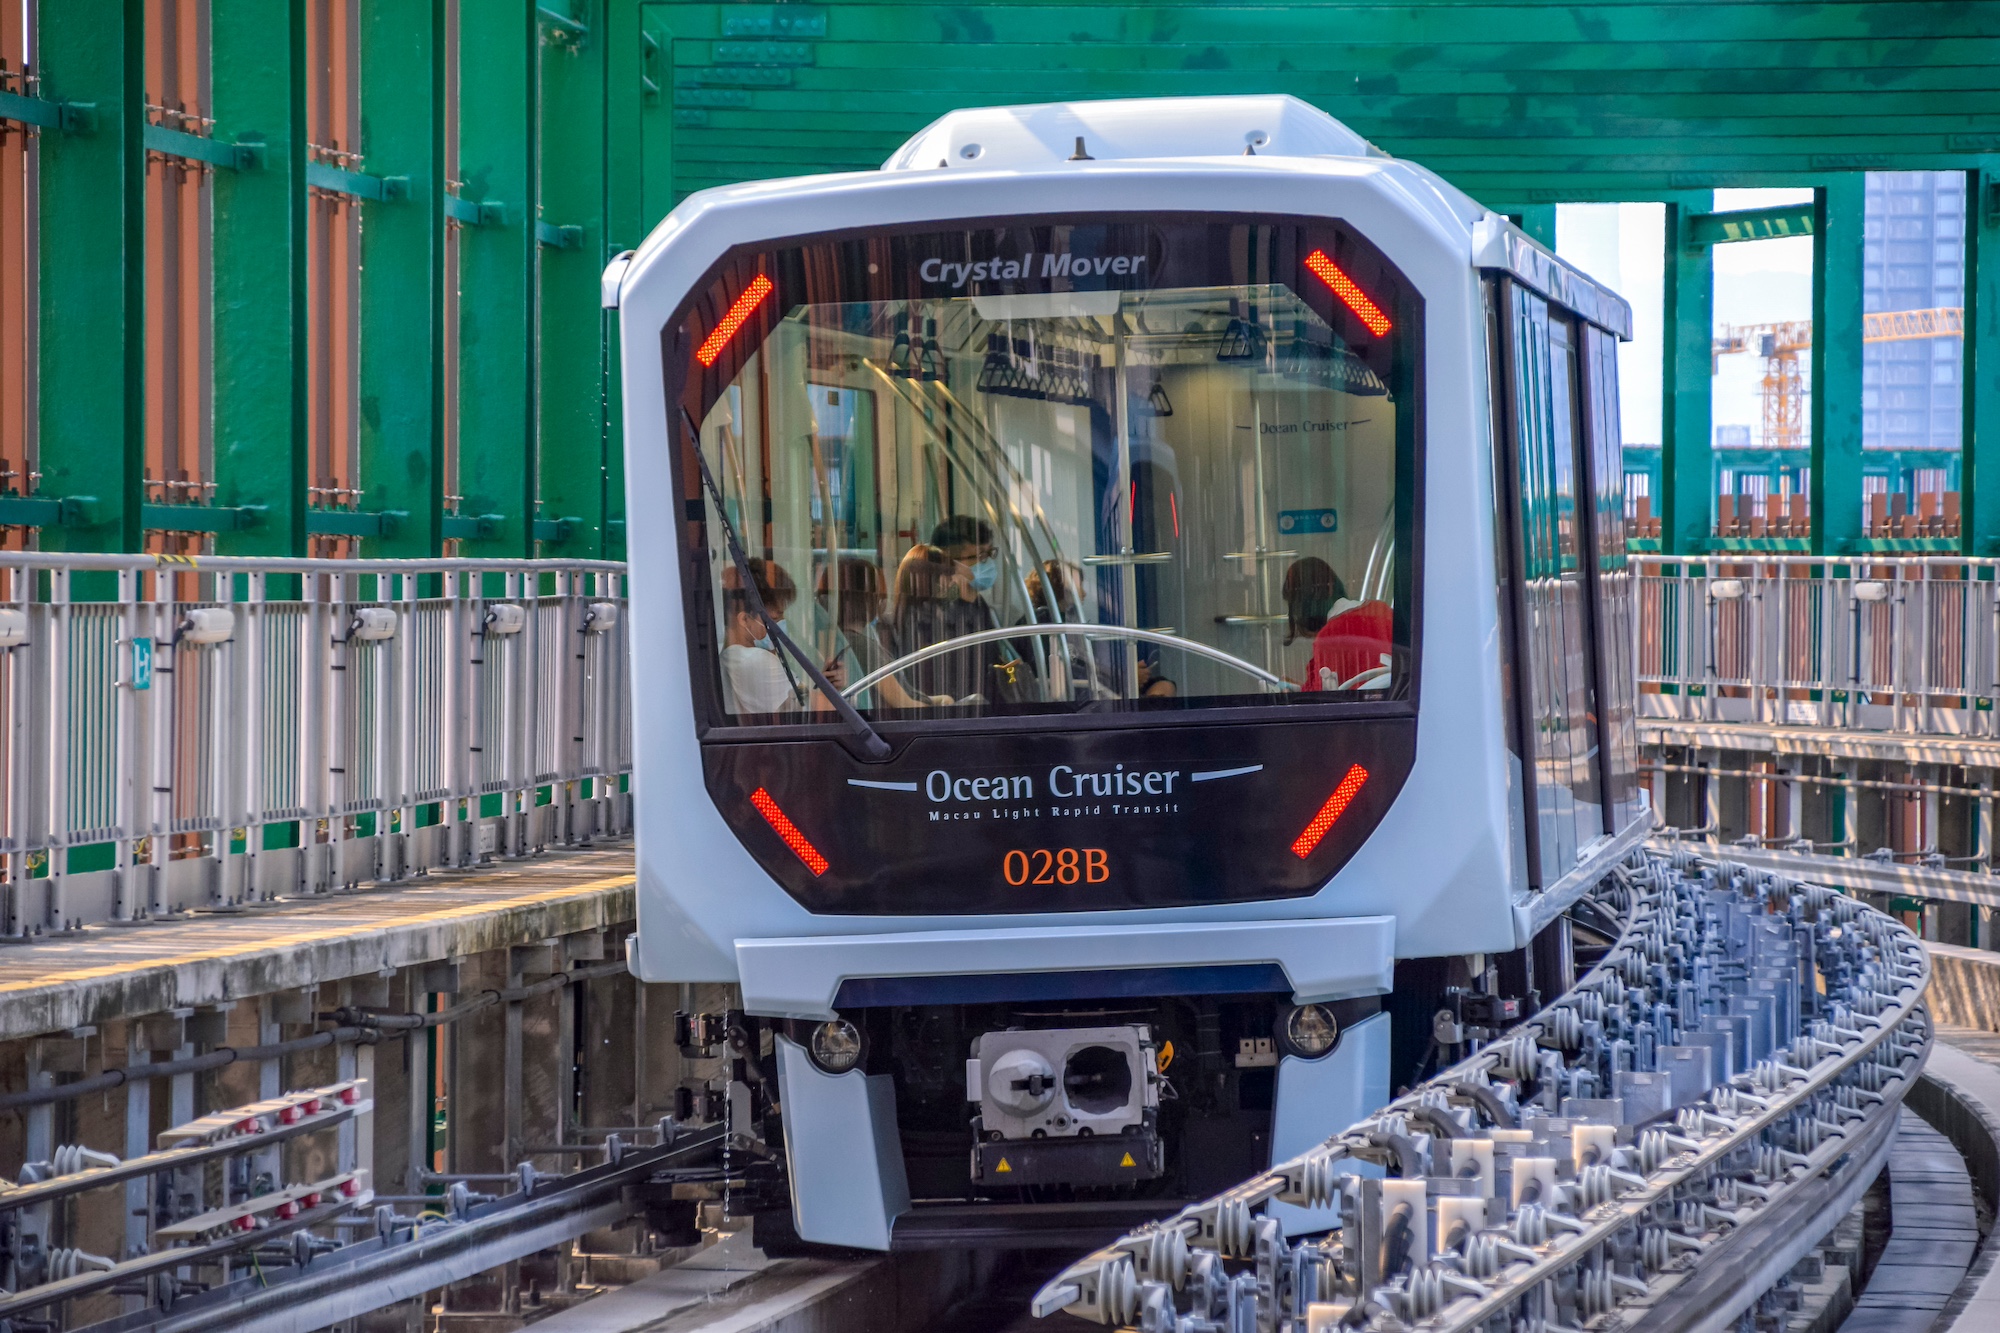 Macao is seeking extra territory to accommodate the LRT East Line